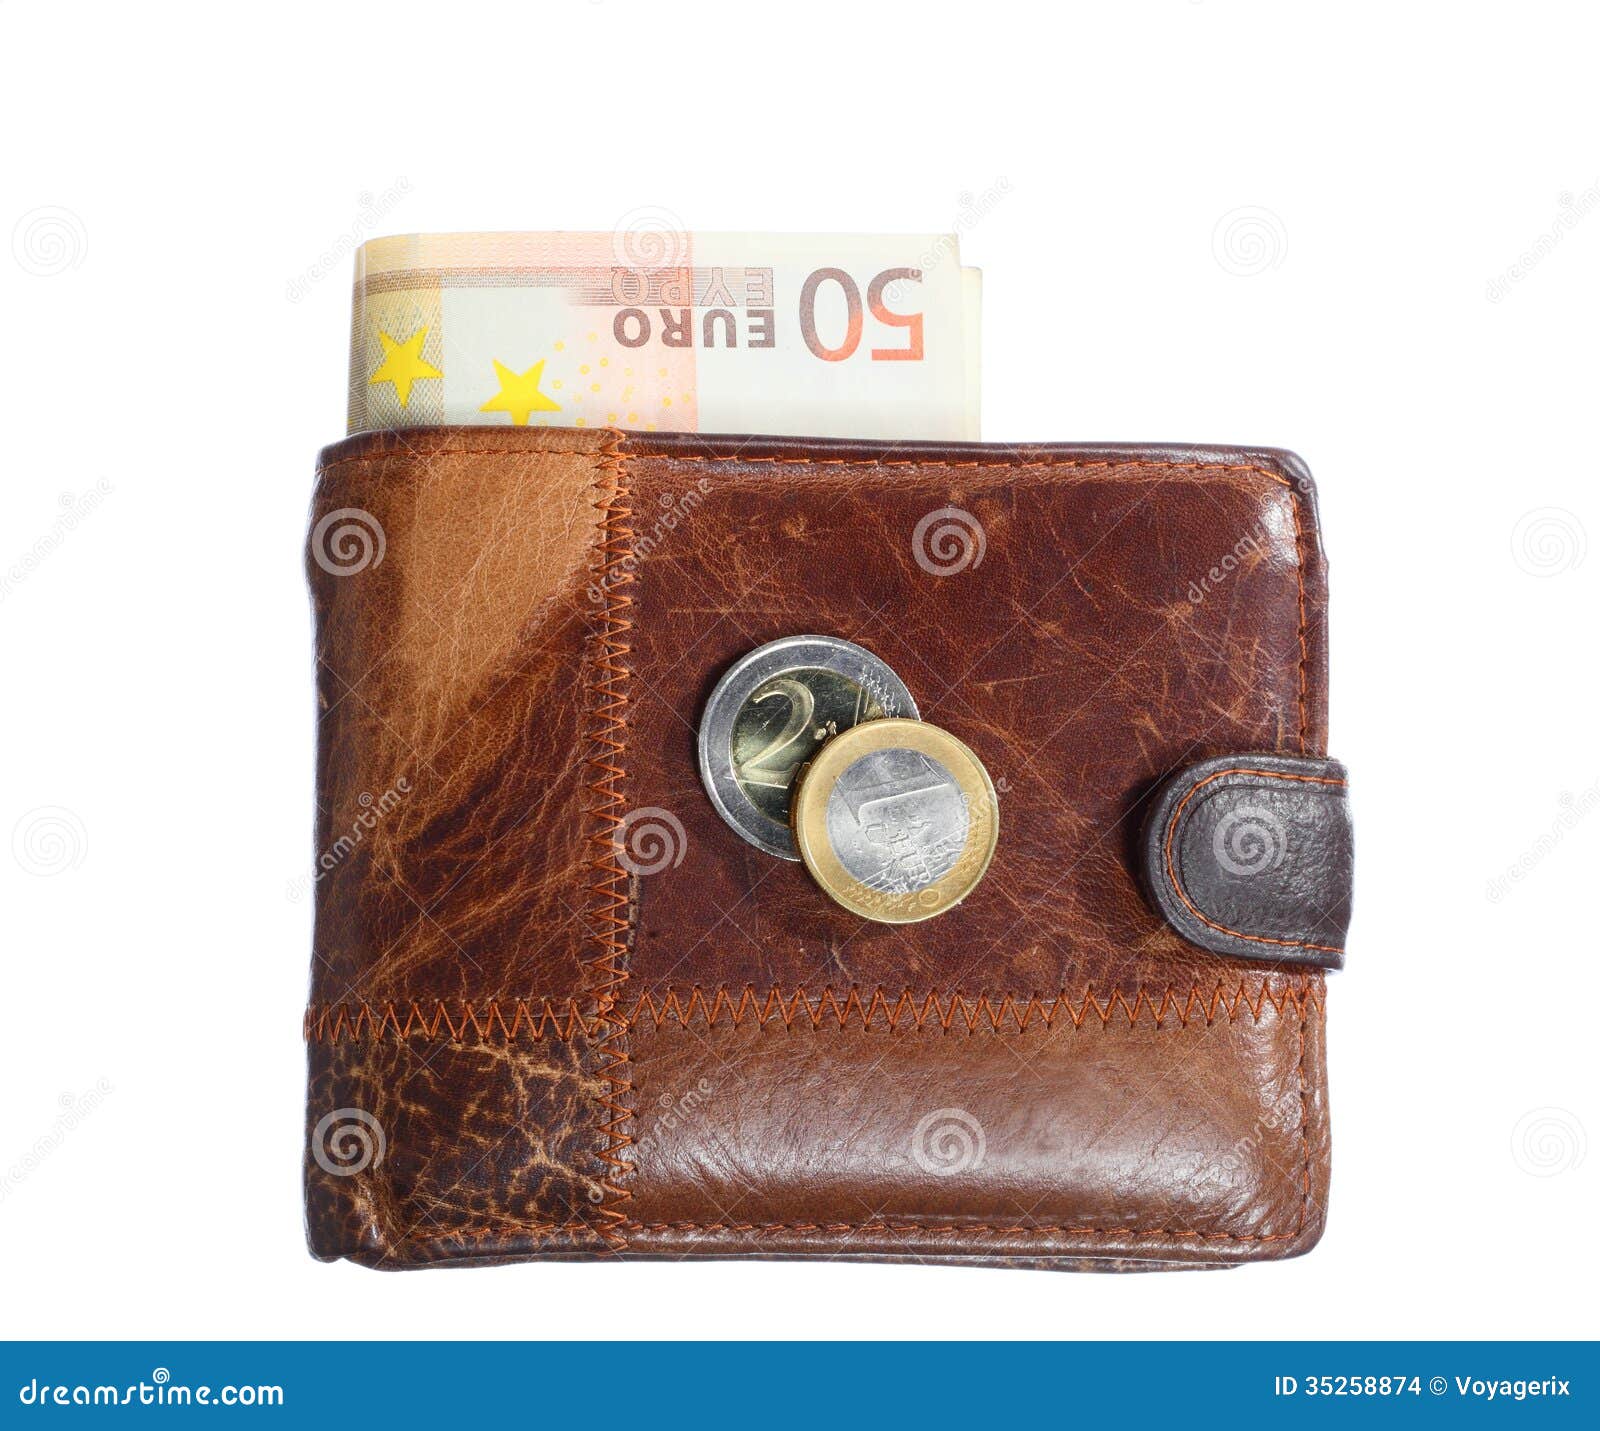 Economy And Finance. Wallet With Euro Banknote Isolated Stock Photo - Image of european, leather ...